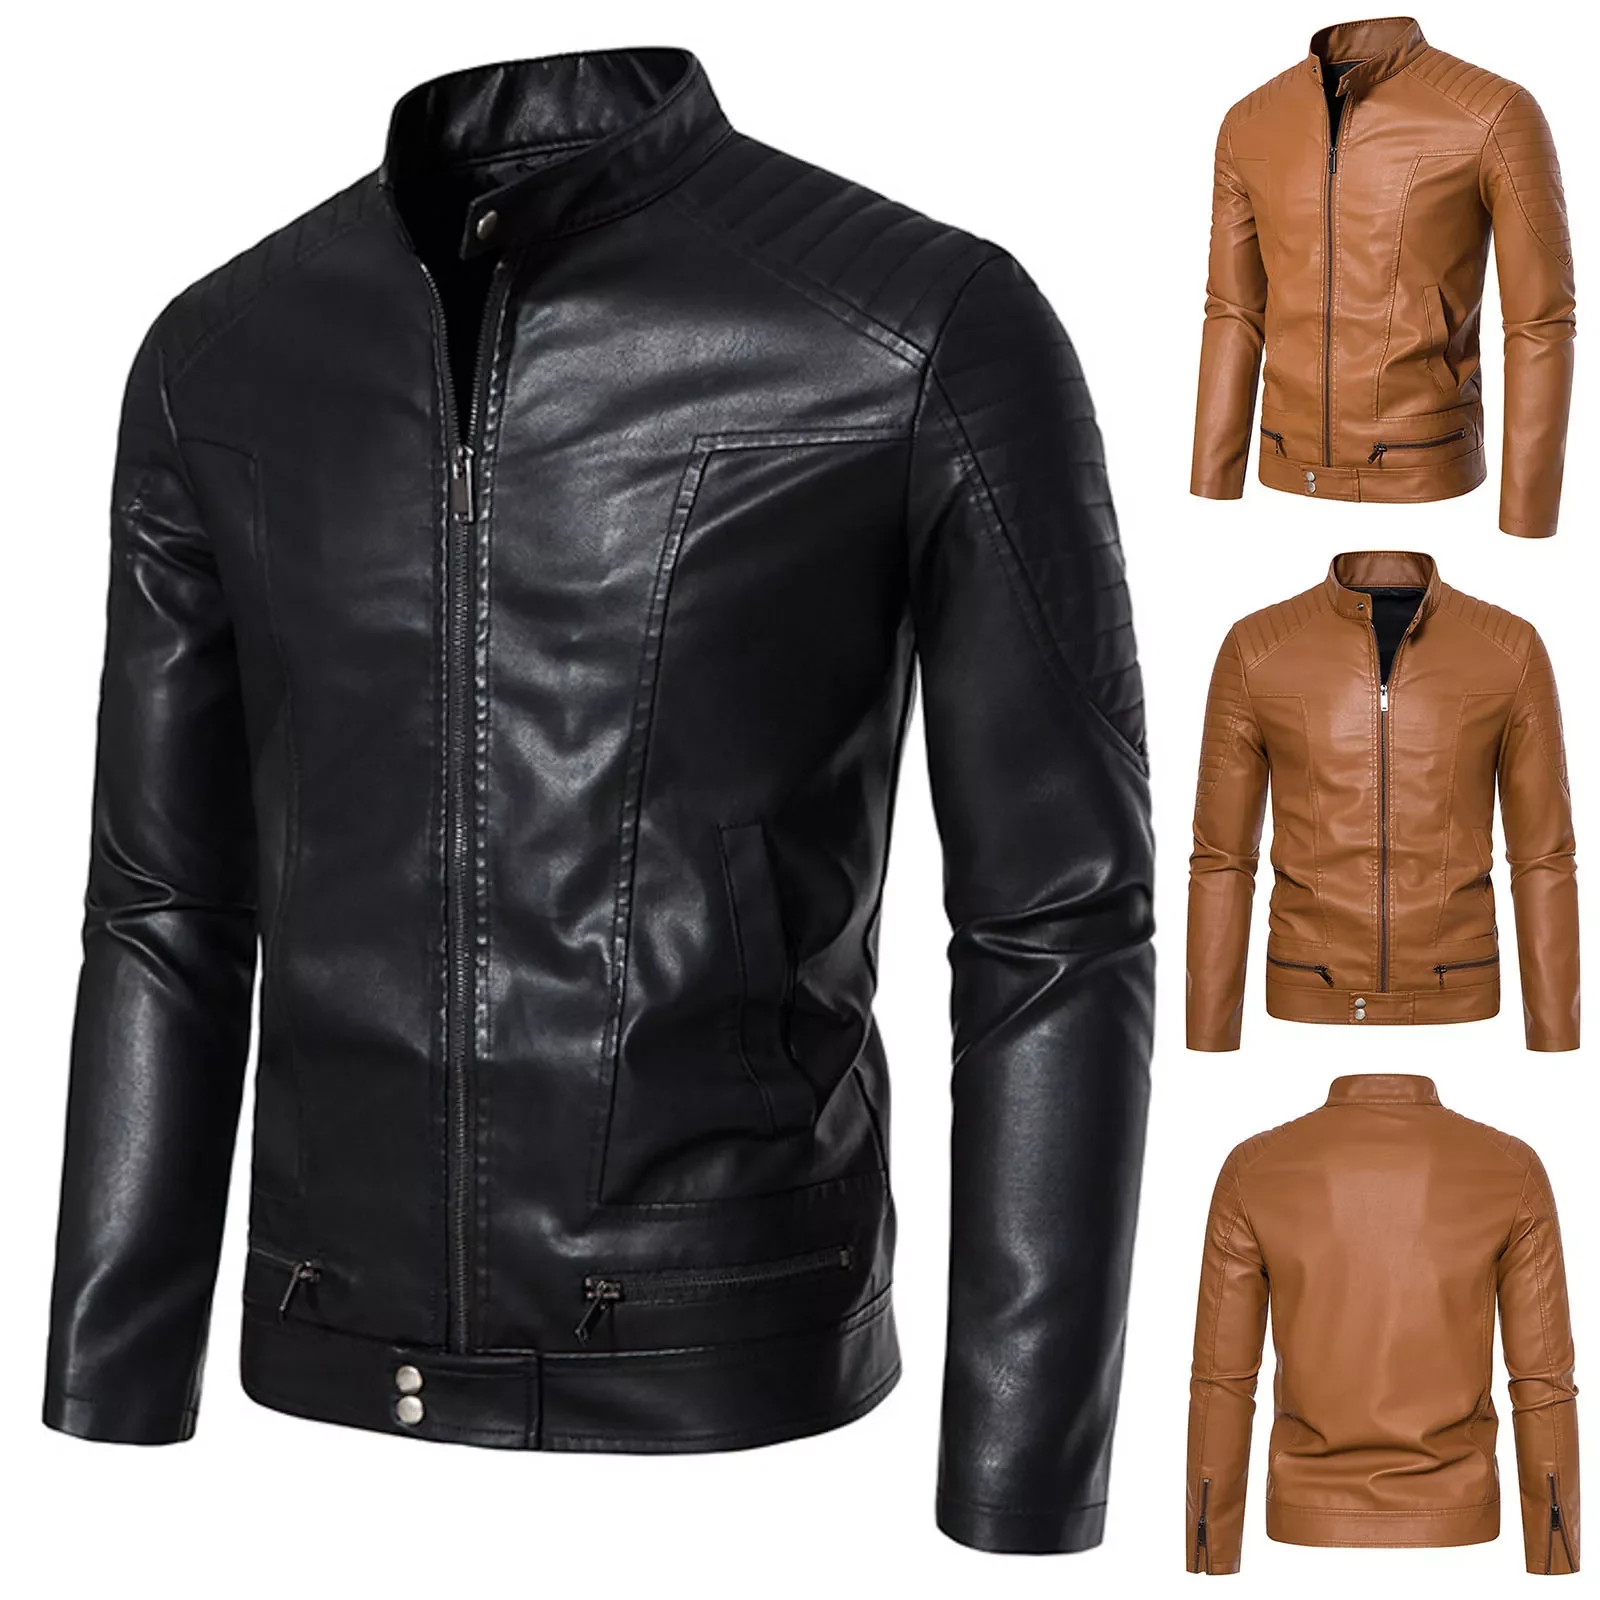 

Mens Spring And Autumn Solid Color Zip Pu Leather Jacket Short Lapel Motorcycle Leather Jacket Coat B3 Jacket